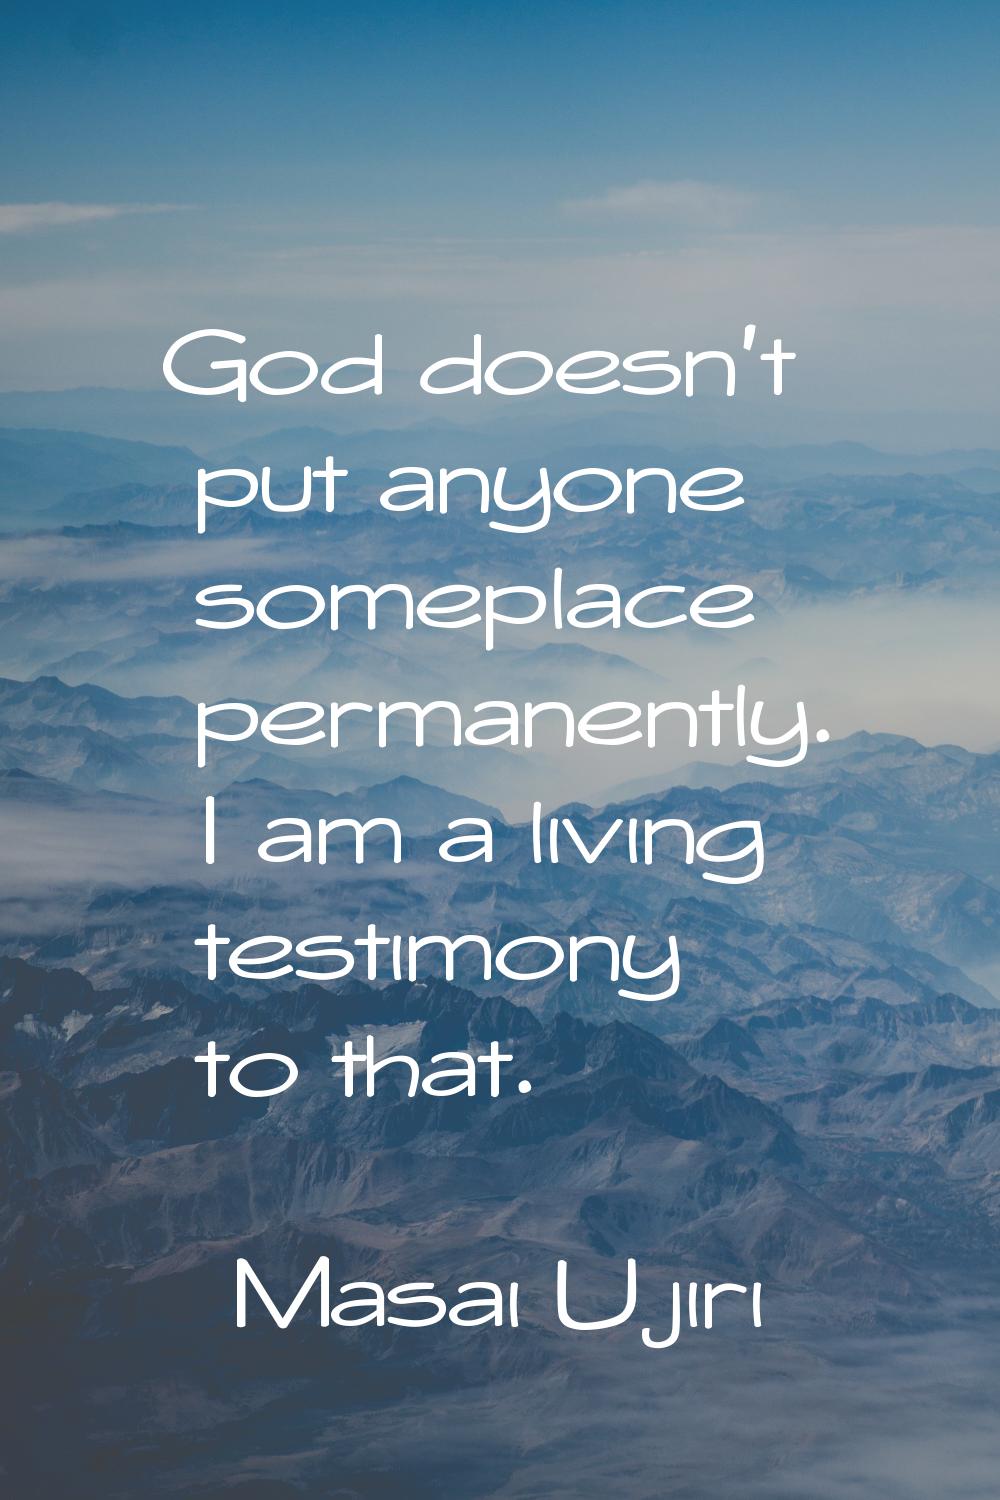 God doesn't put anyone someplace permanently. I am a living testimony to that.